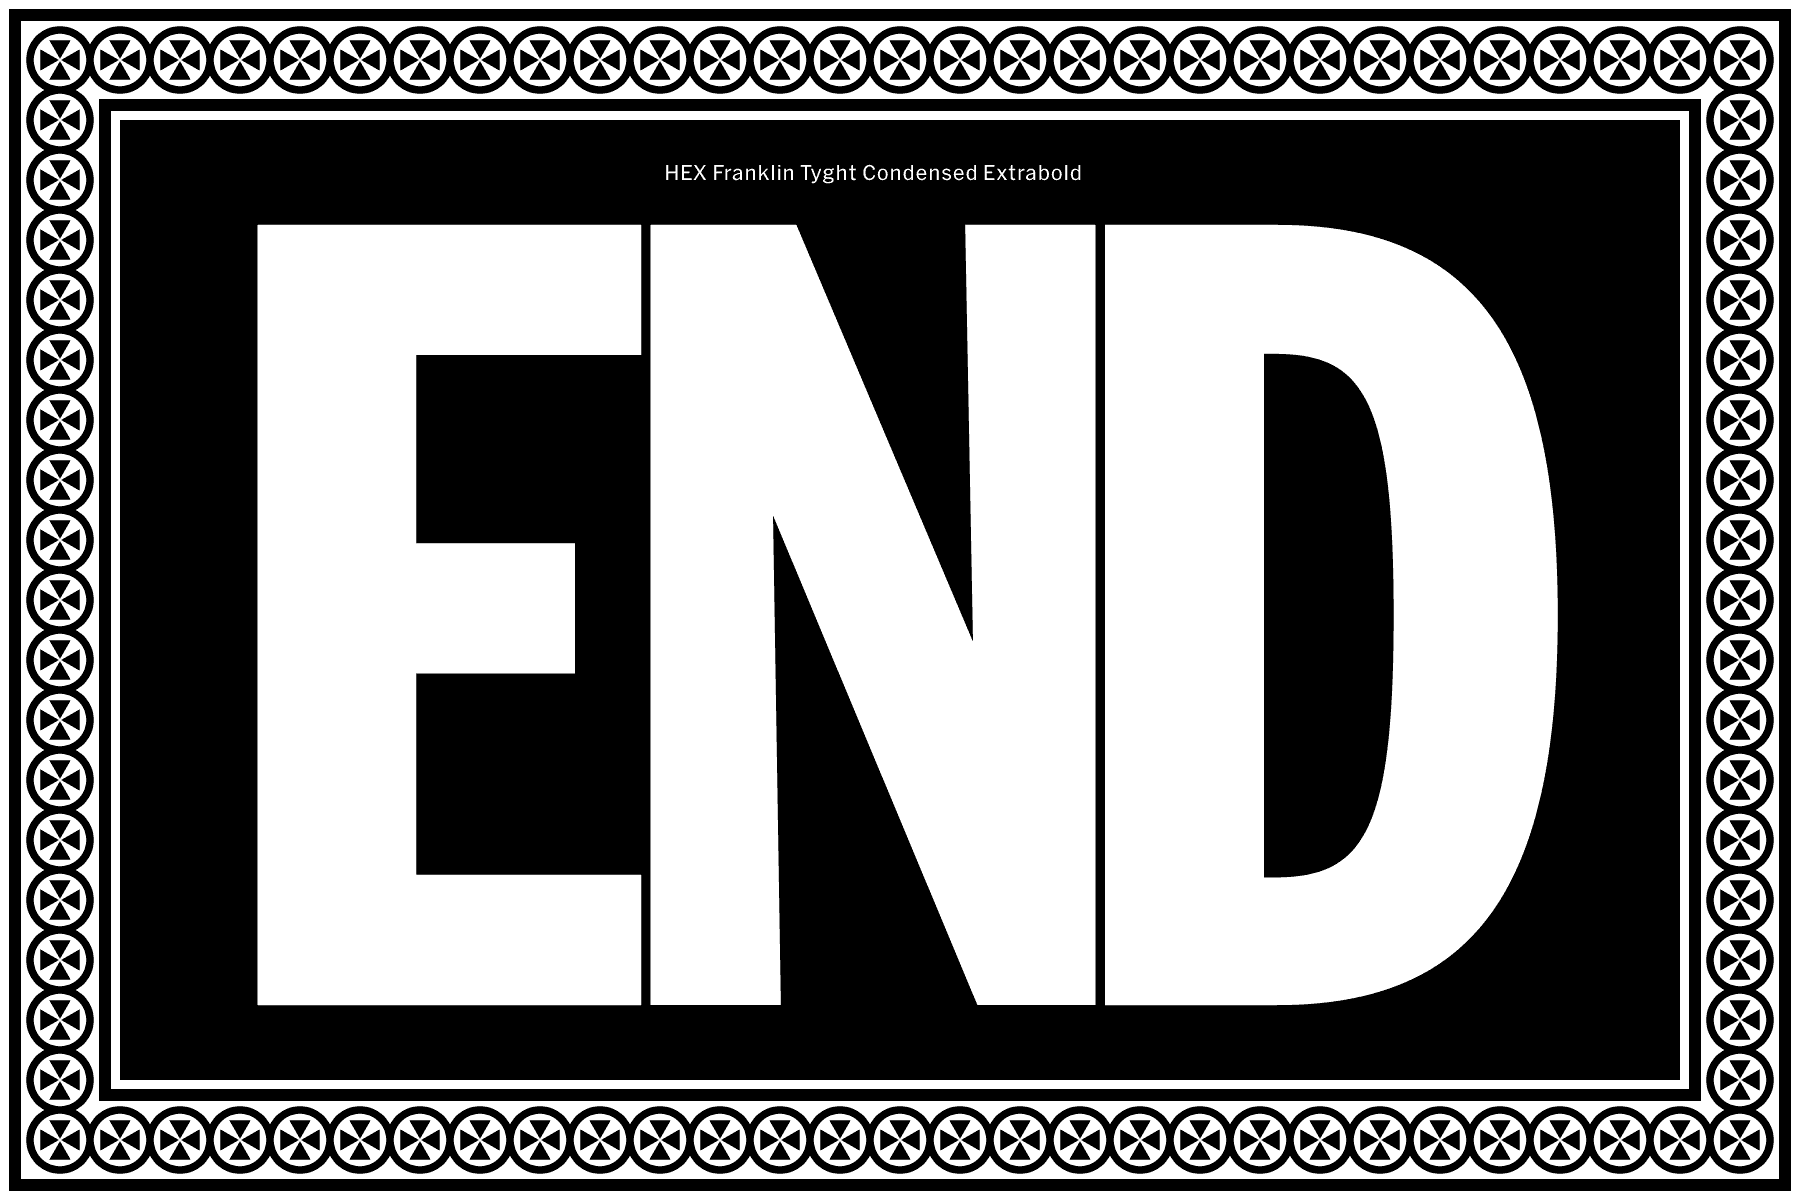 ‘End’ in HEX Franklin Tyght Condensed Extrabold